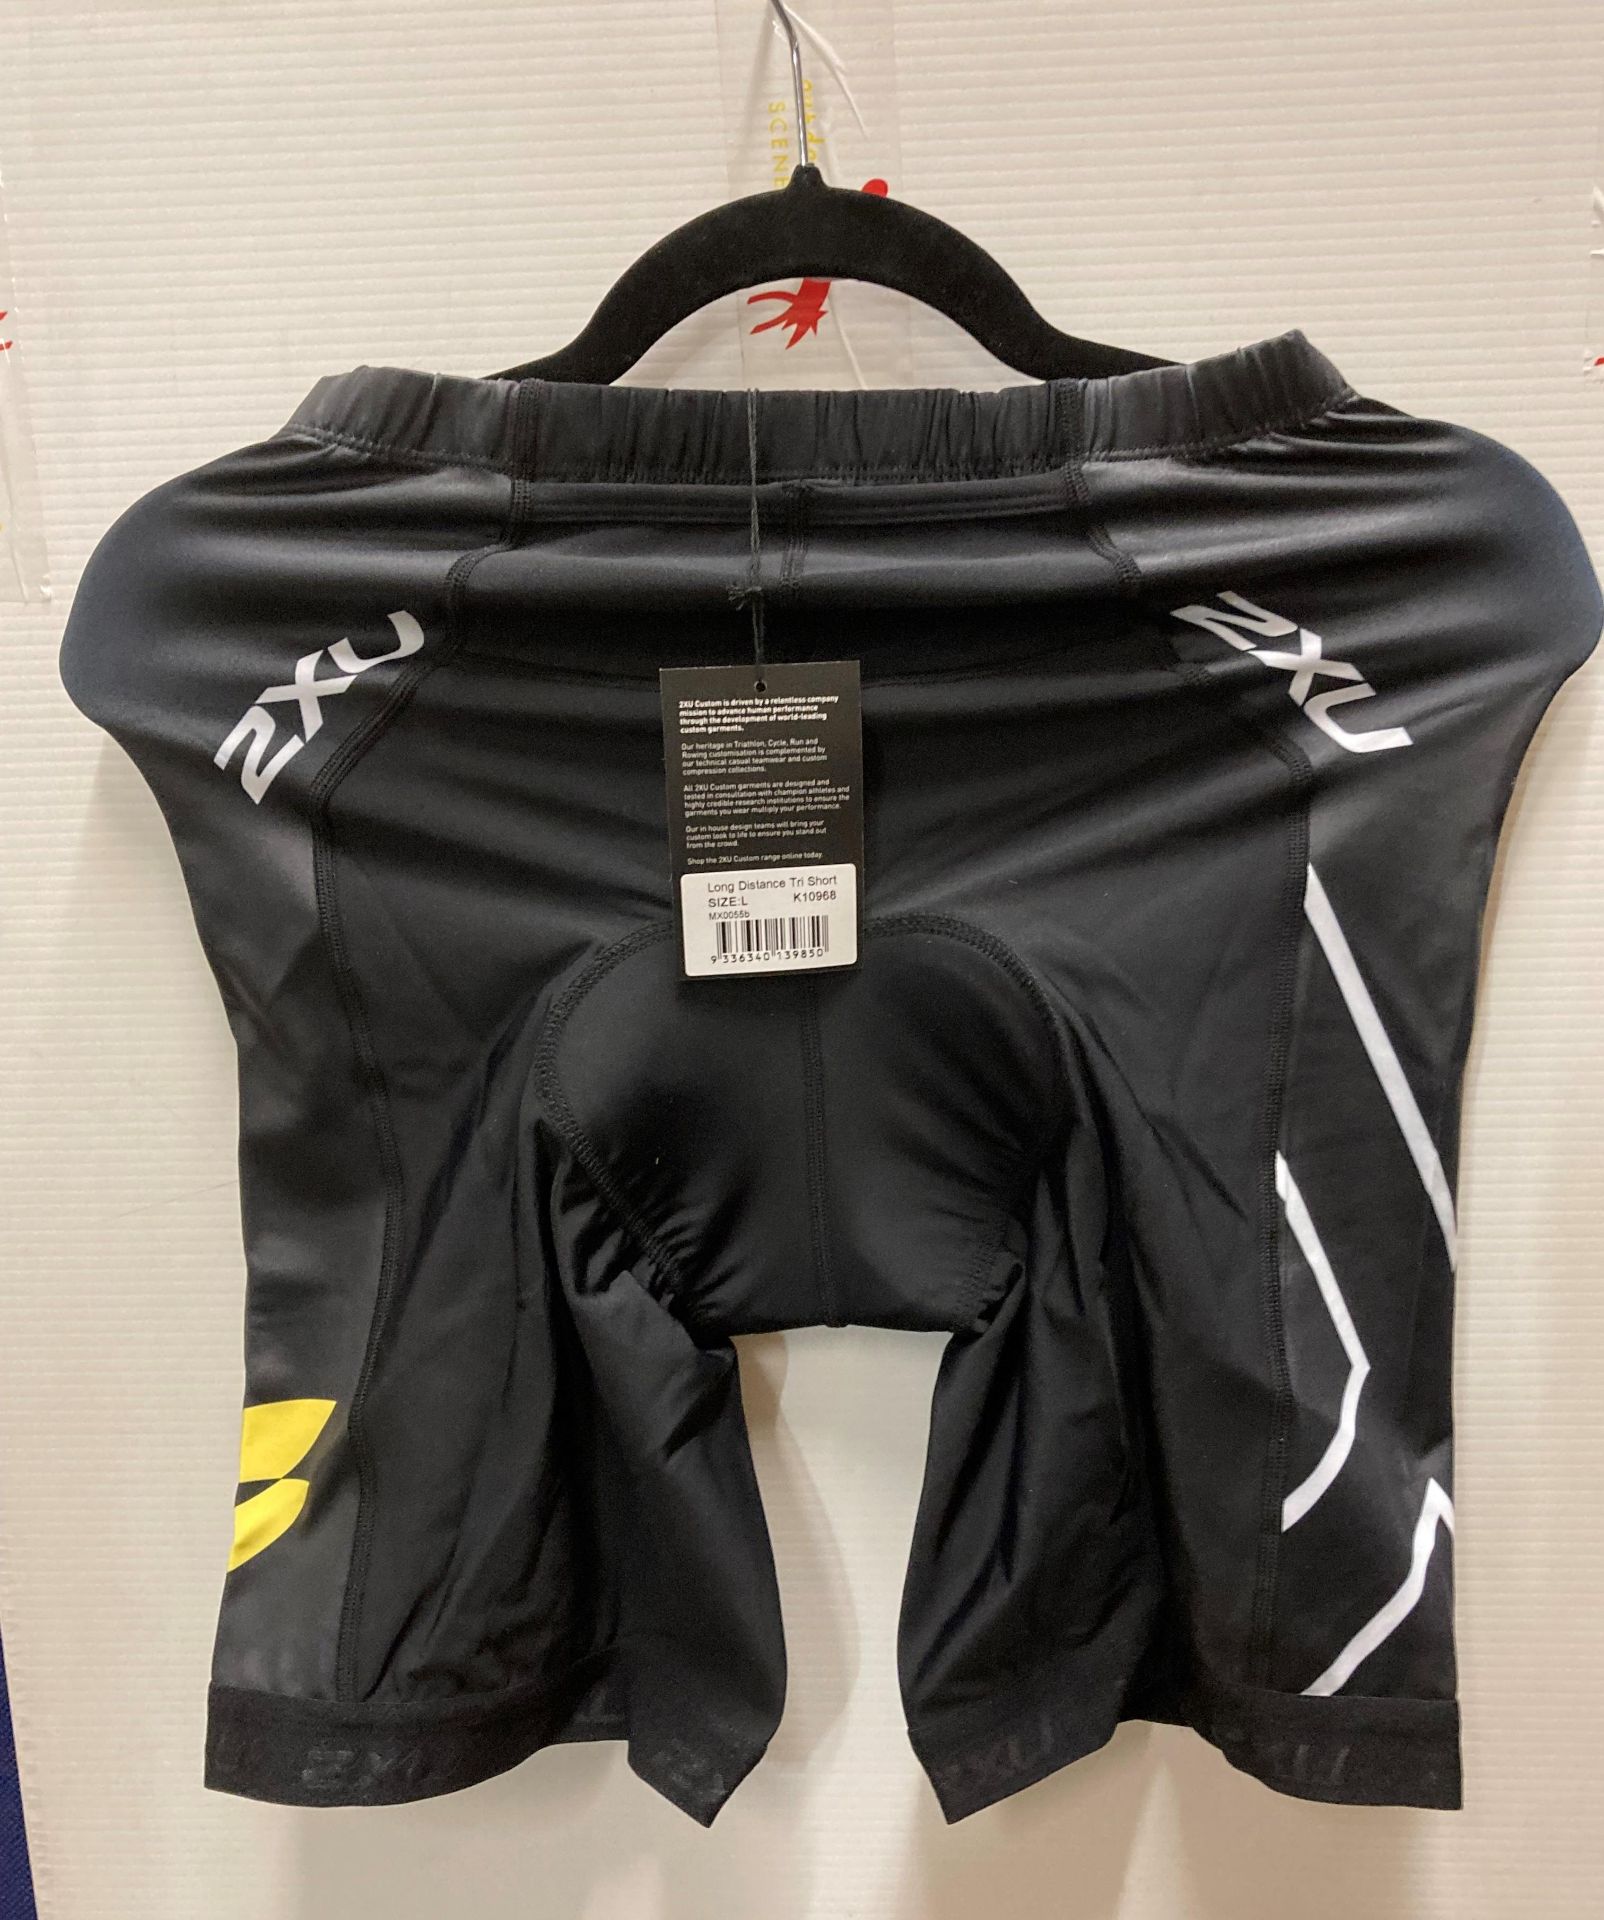 22 x pairs of 2XU men's triathlon/cycling shorts (size M) Further Information *** - Image 2 of 3